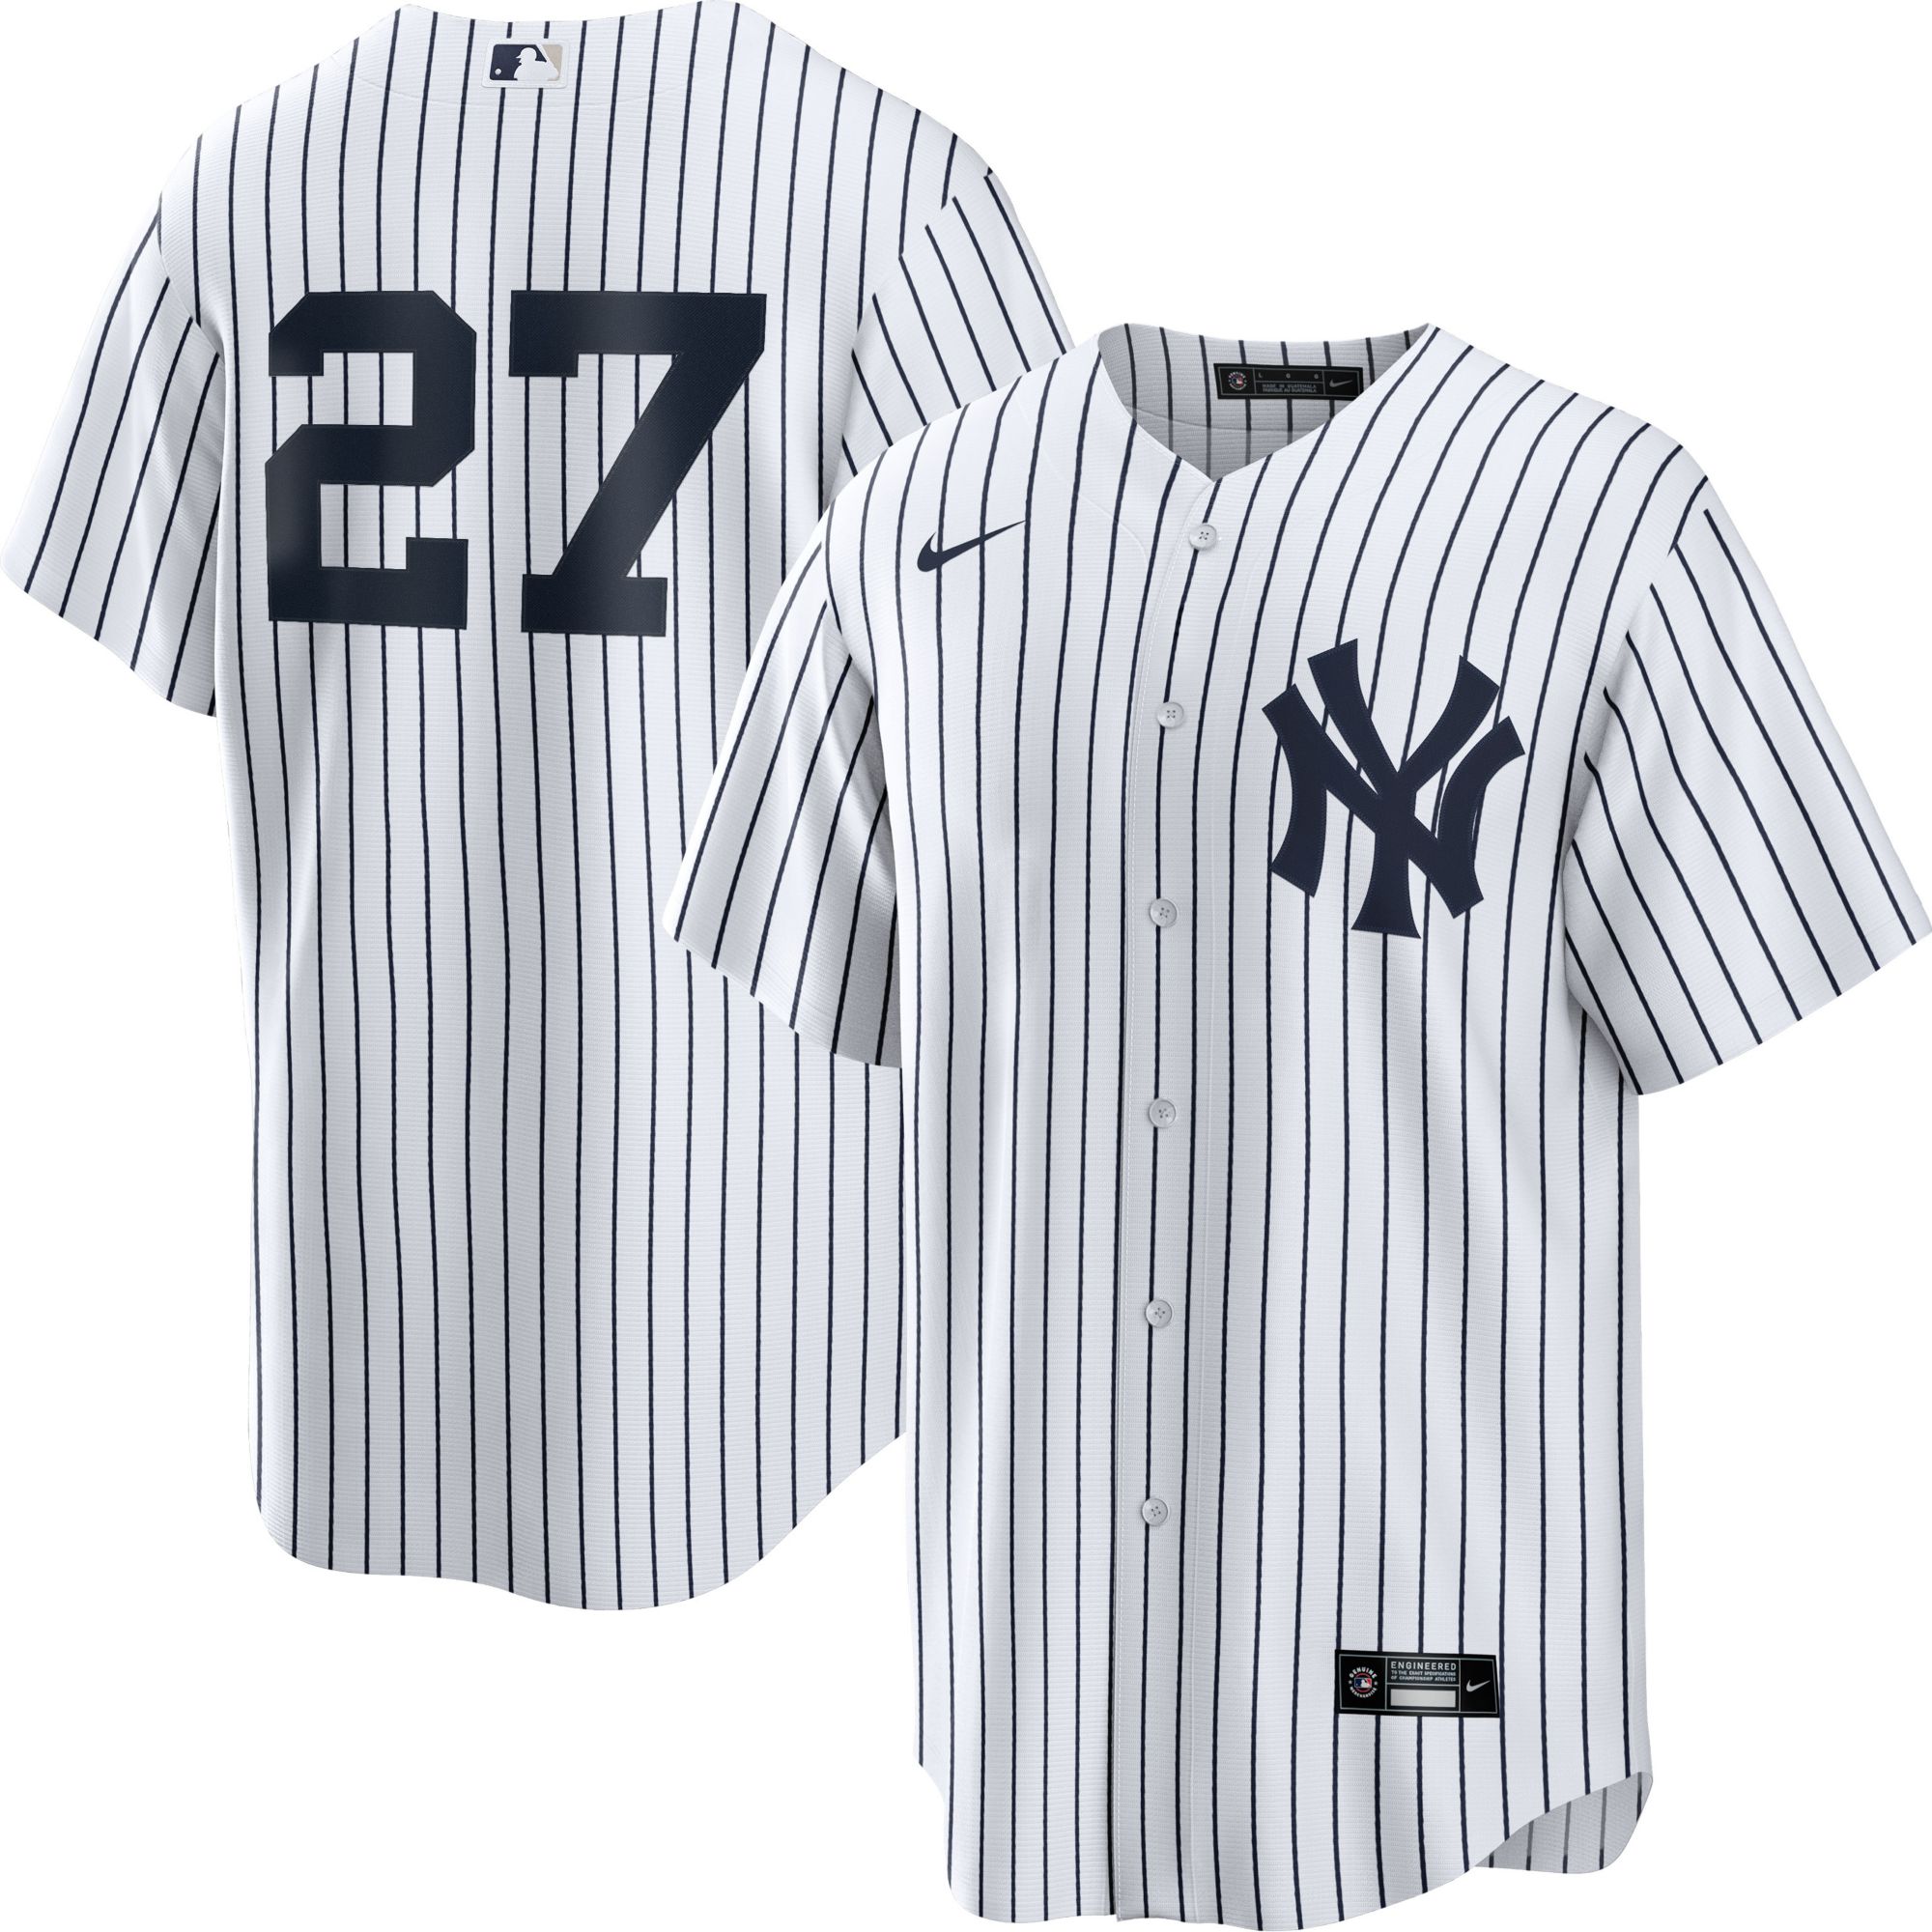  Aaron Judge New York Yankees #99 Youth 8-20 Navy Cool Base  Alternate Replica Jersey (Large 14/16) : Sports & Outdoors